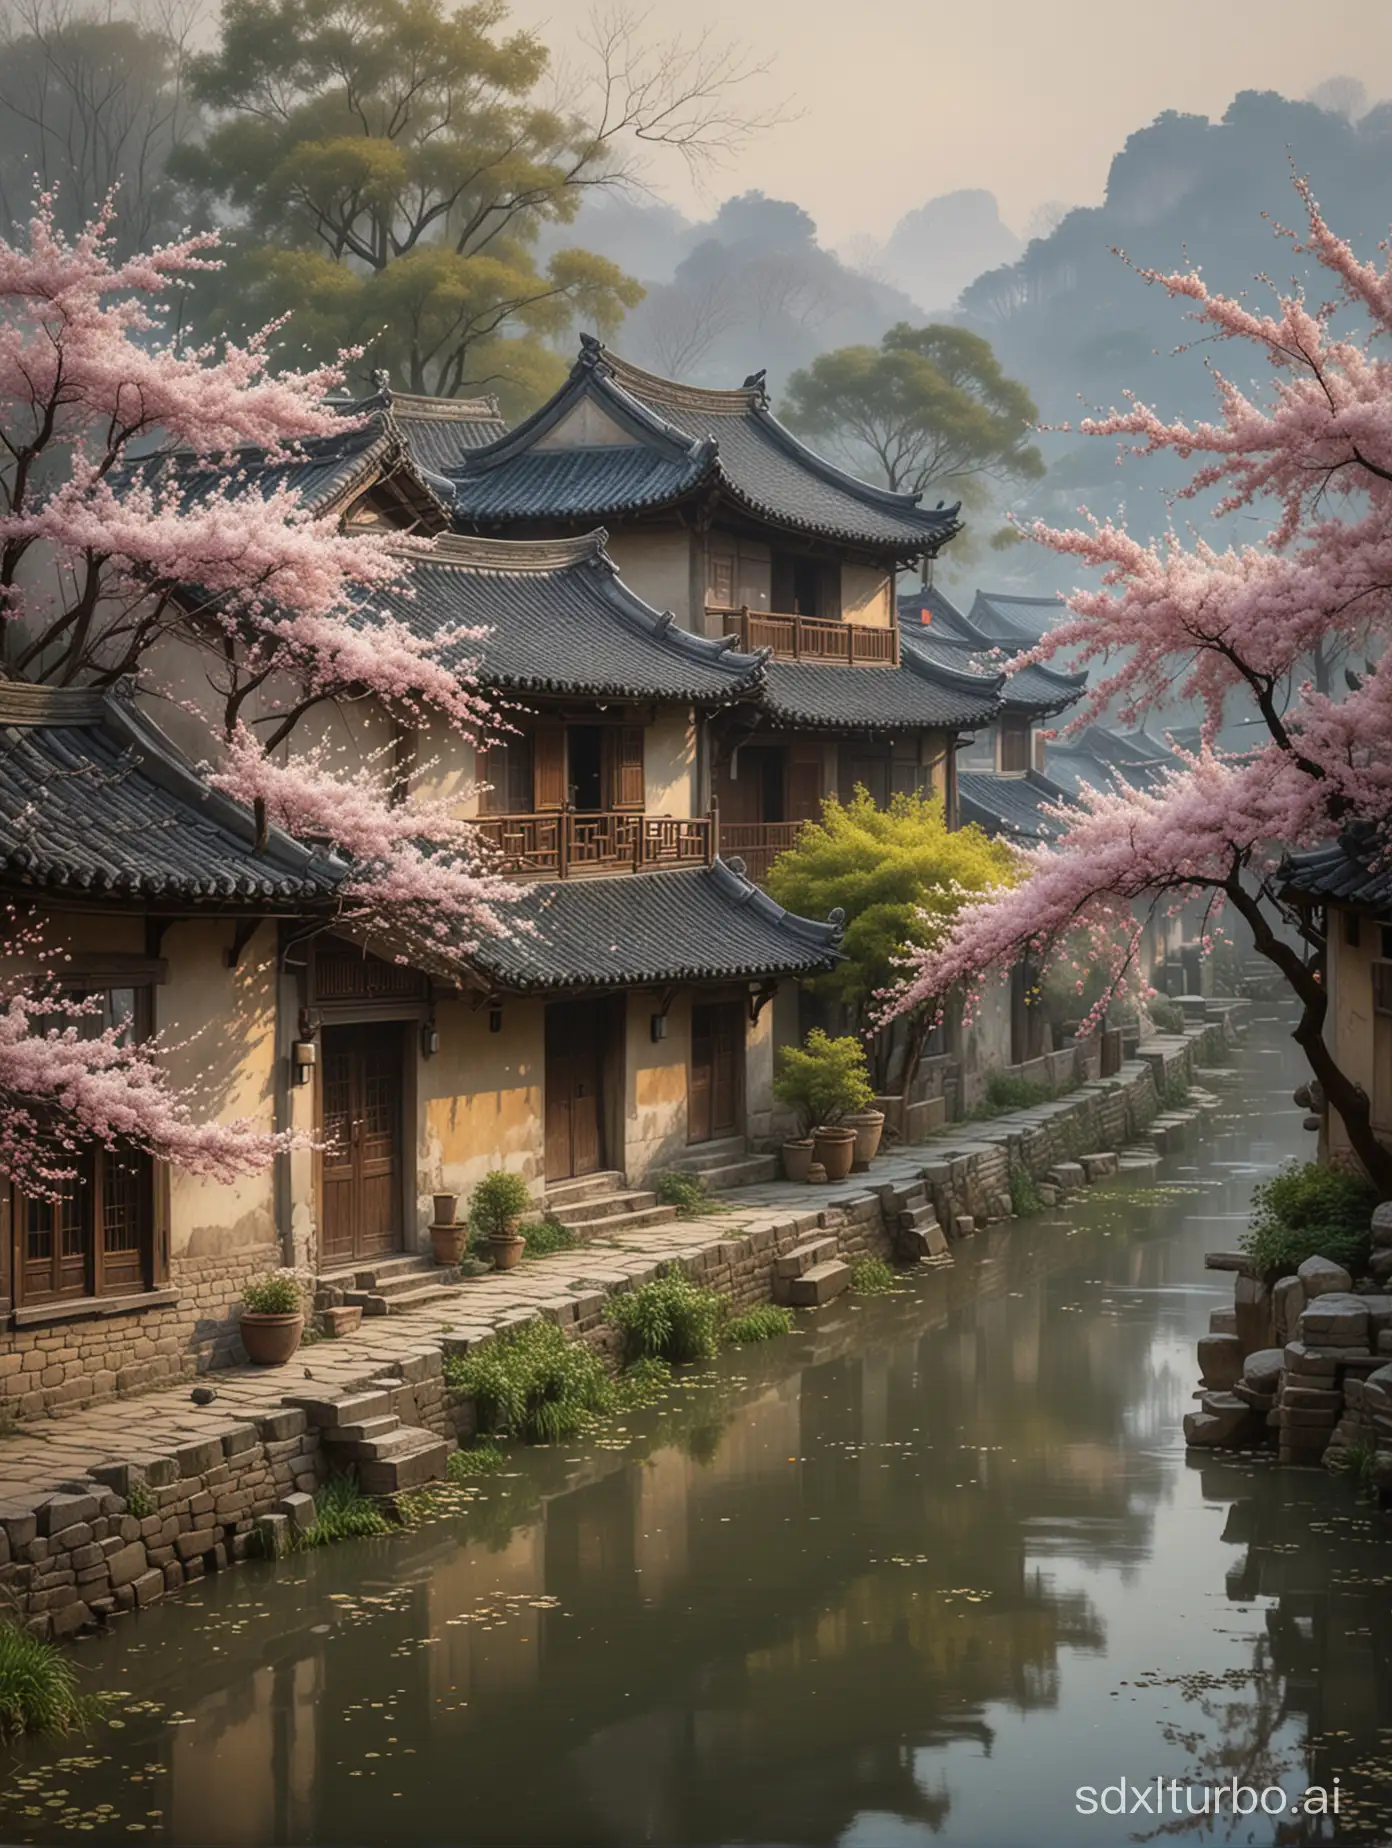 (Masterpiece, highest quality, crazy details, award-winning photography), (rural painting with trees and river as background), (low light, low saturation, low contrast, oil painting style, strong brush strokes), fallen flowers, worn Close-up of rural stone house, several cherry blossom trees, houses in distant mountains, nearby trees, small bridges and flowing water, Wuzhen, Jiangnan, quiet and peaceful atmosphere,